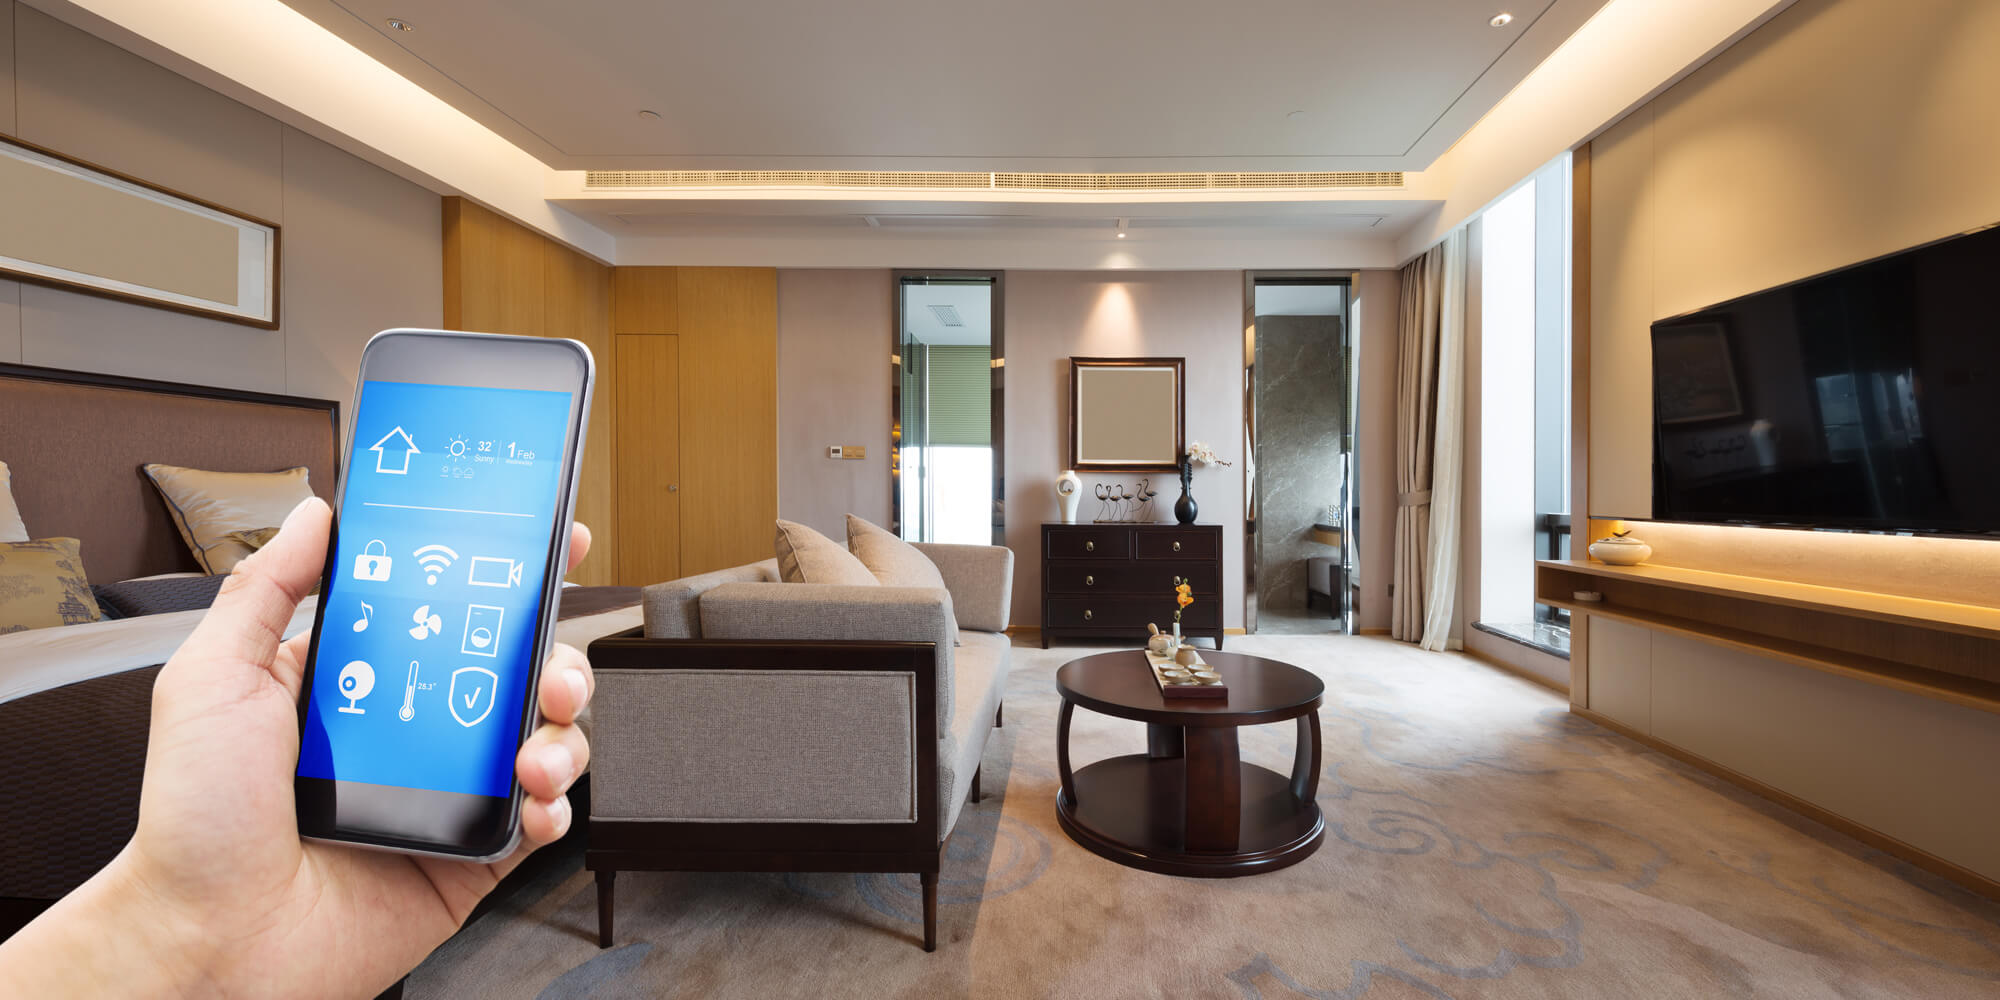 The Smart Home for a Smart Life